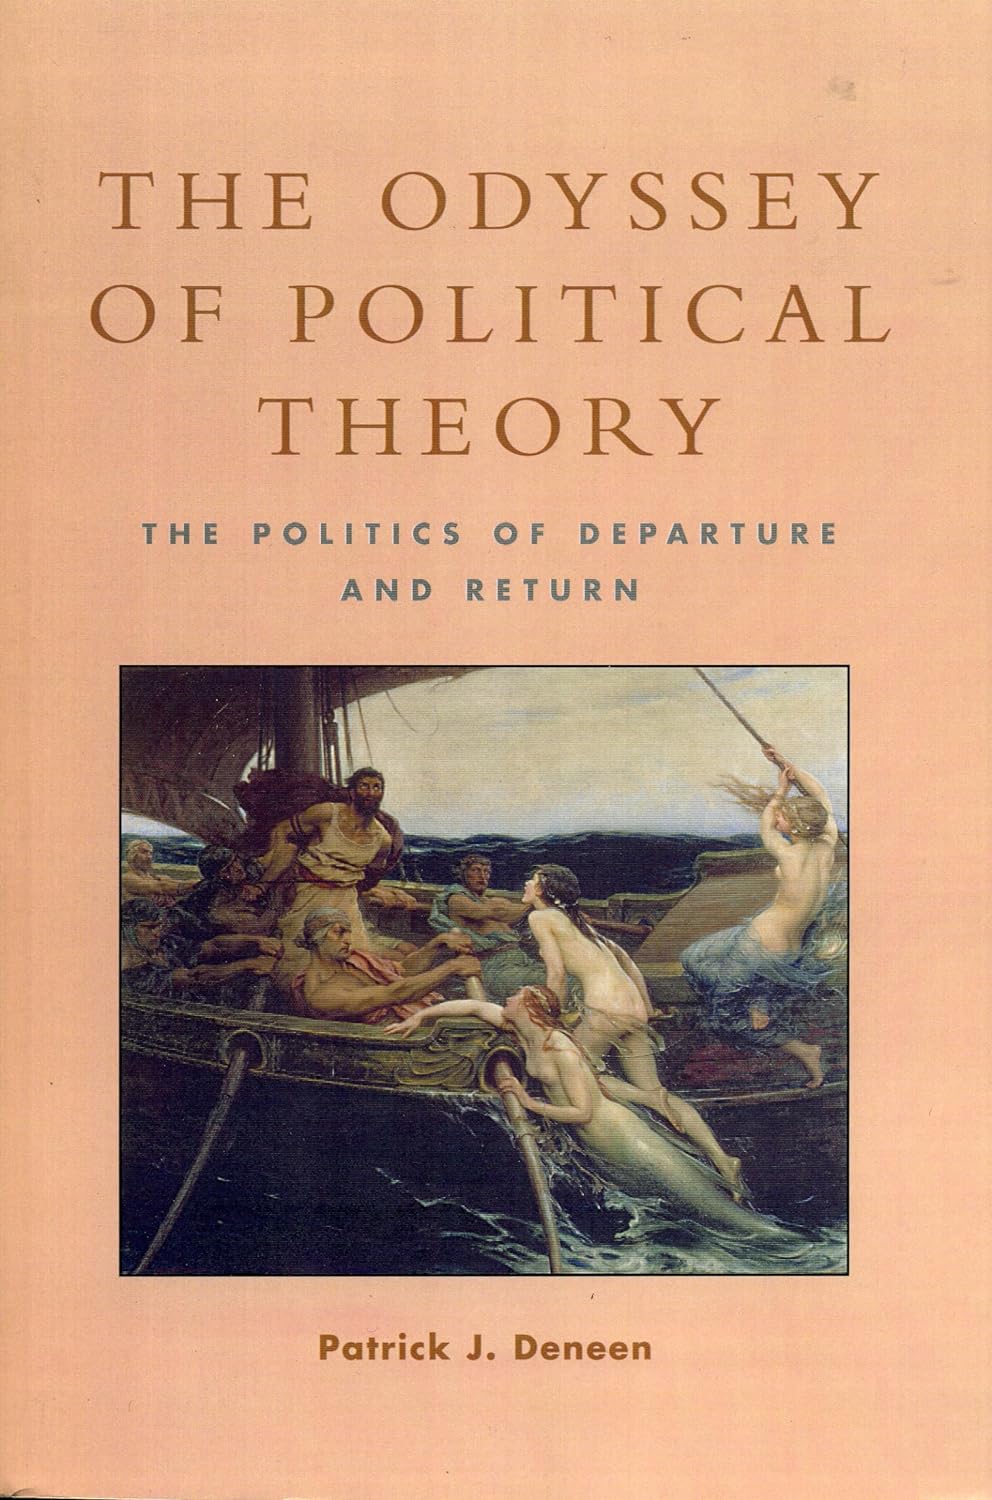 Patrick Deneen, The Odyssey of Political Theory book cover